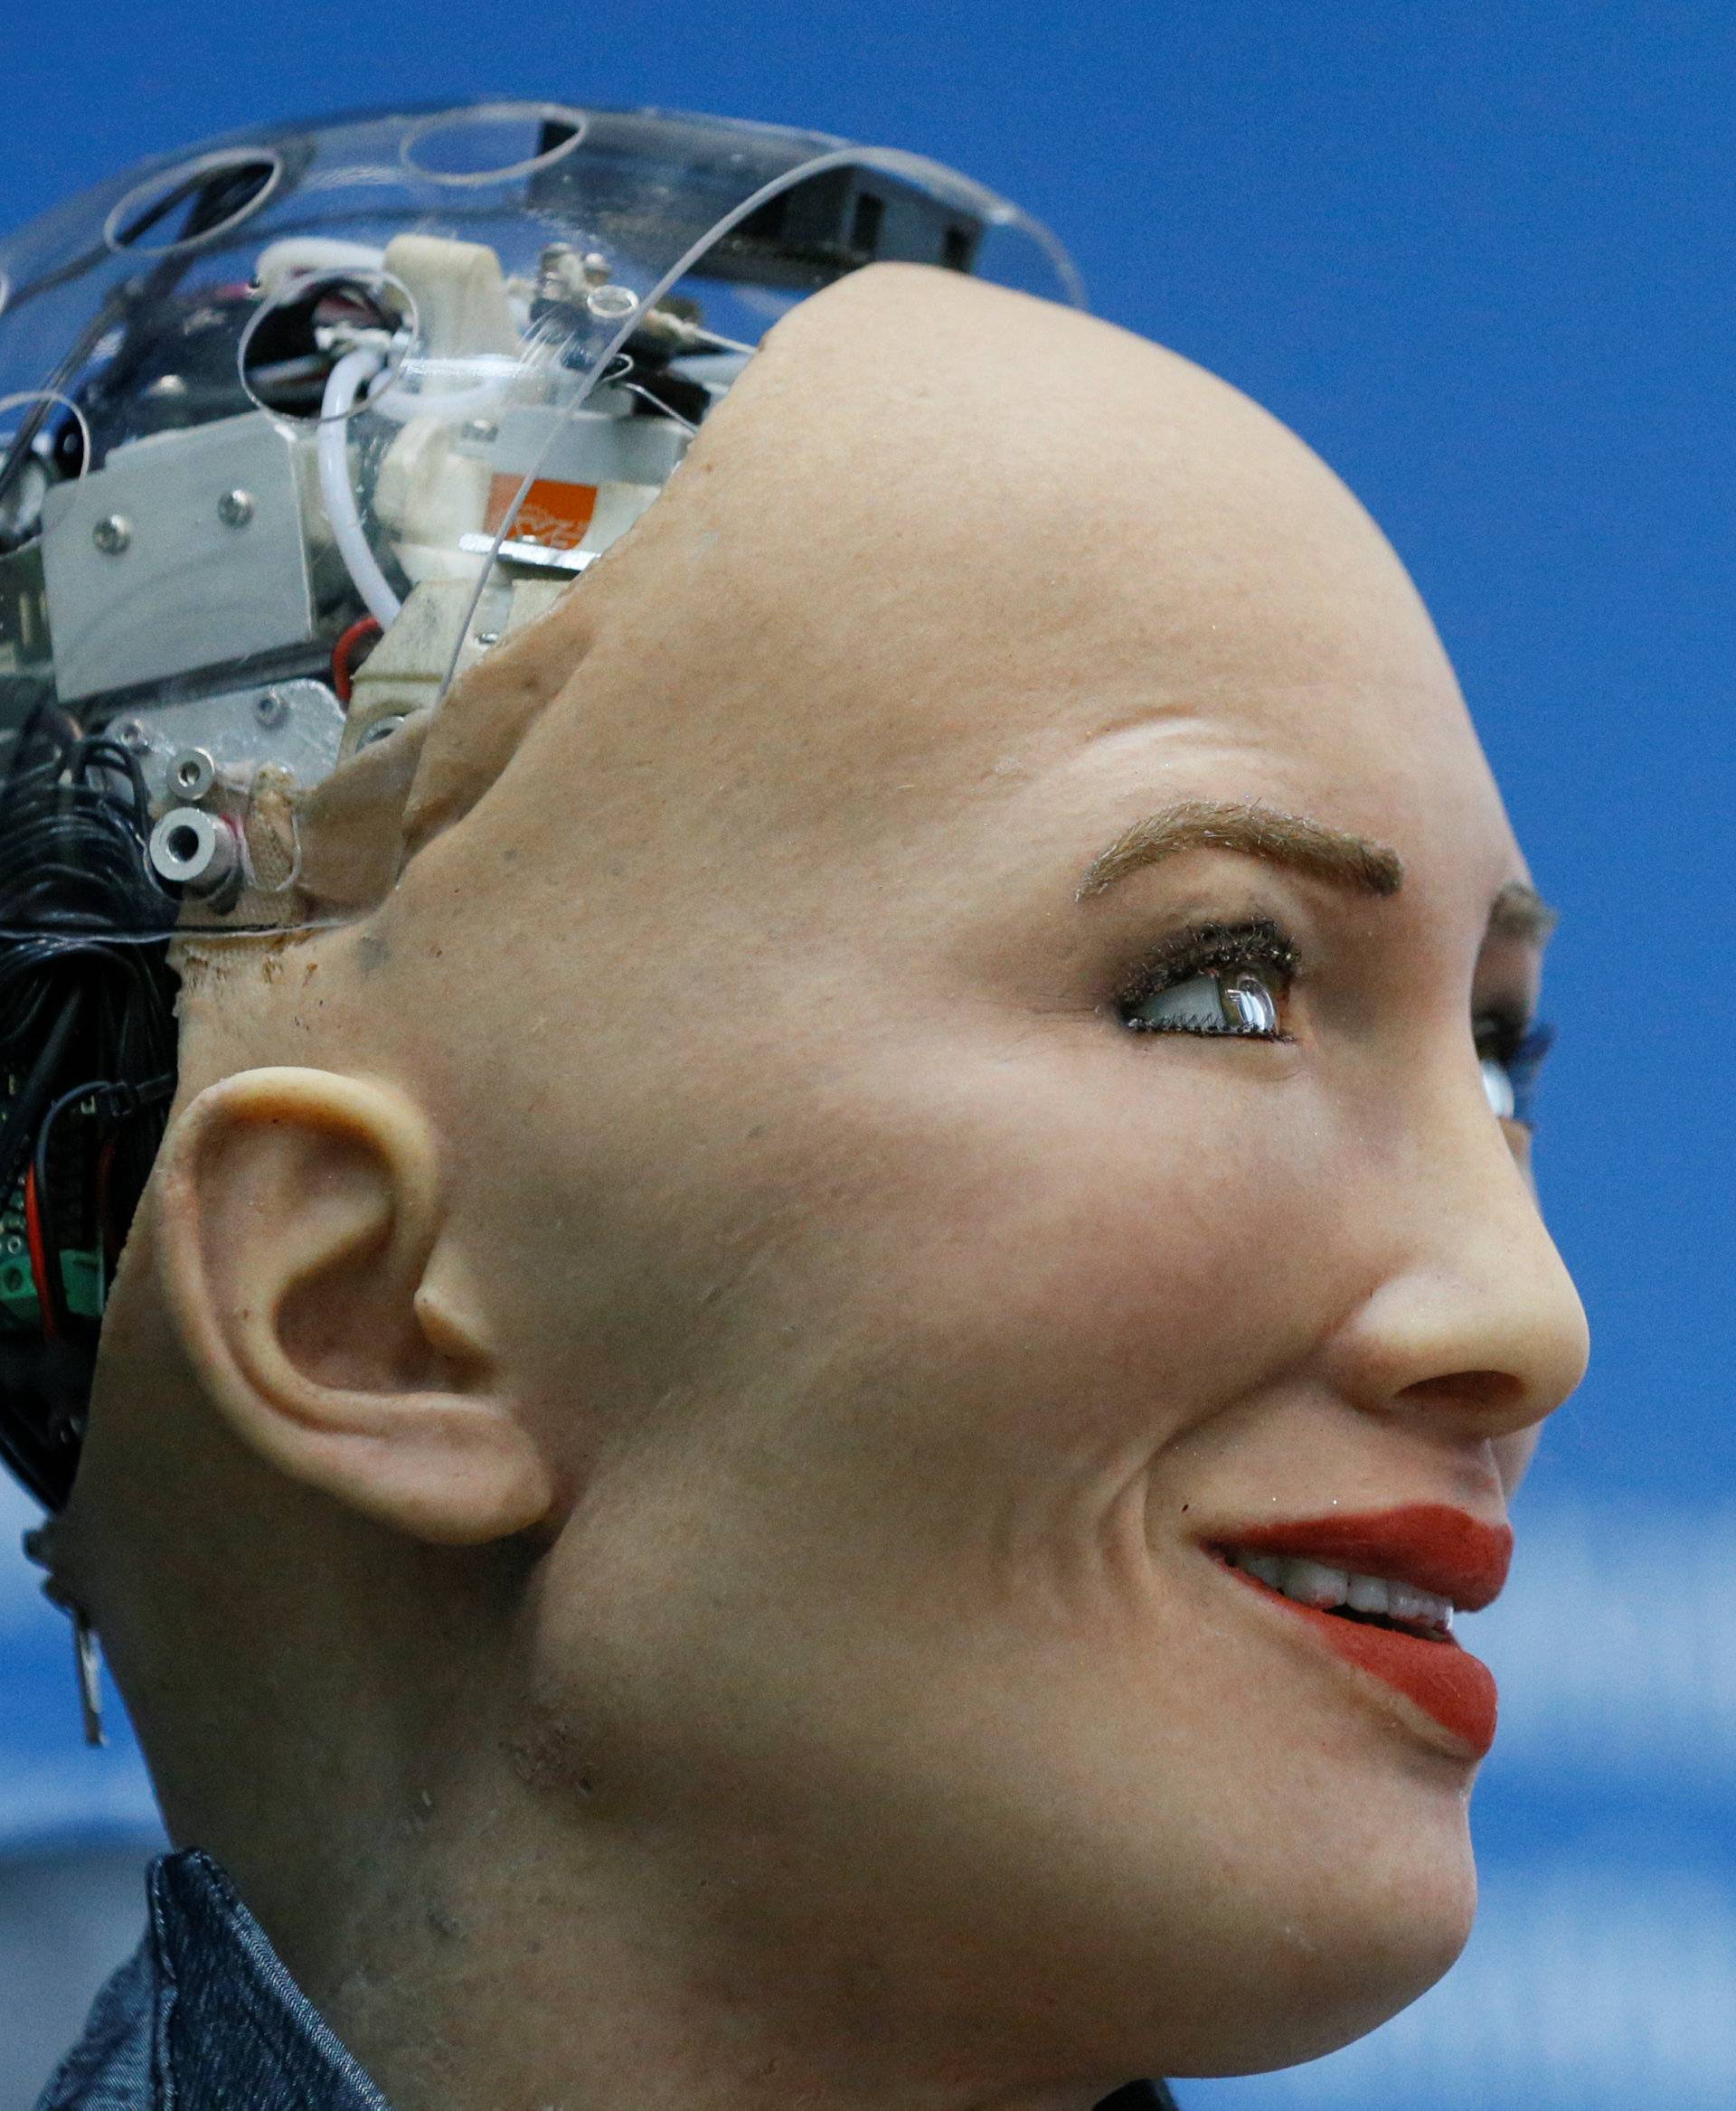 Social humanoid robot Sophia attends a news conference in Kiev